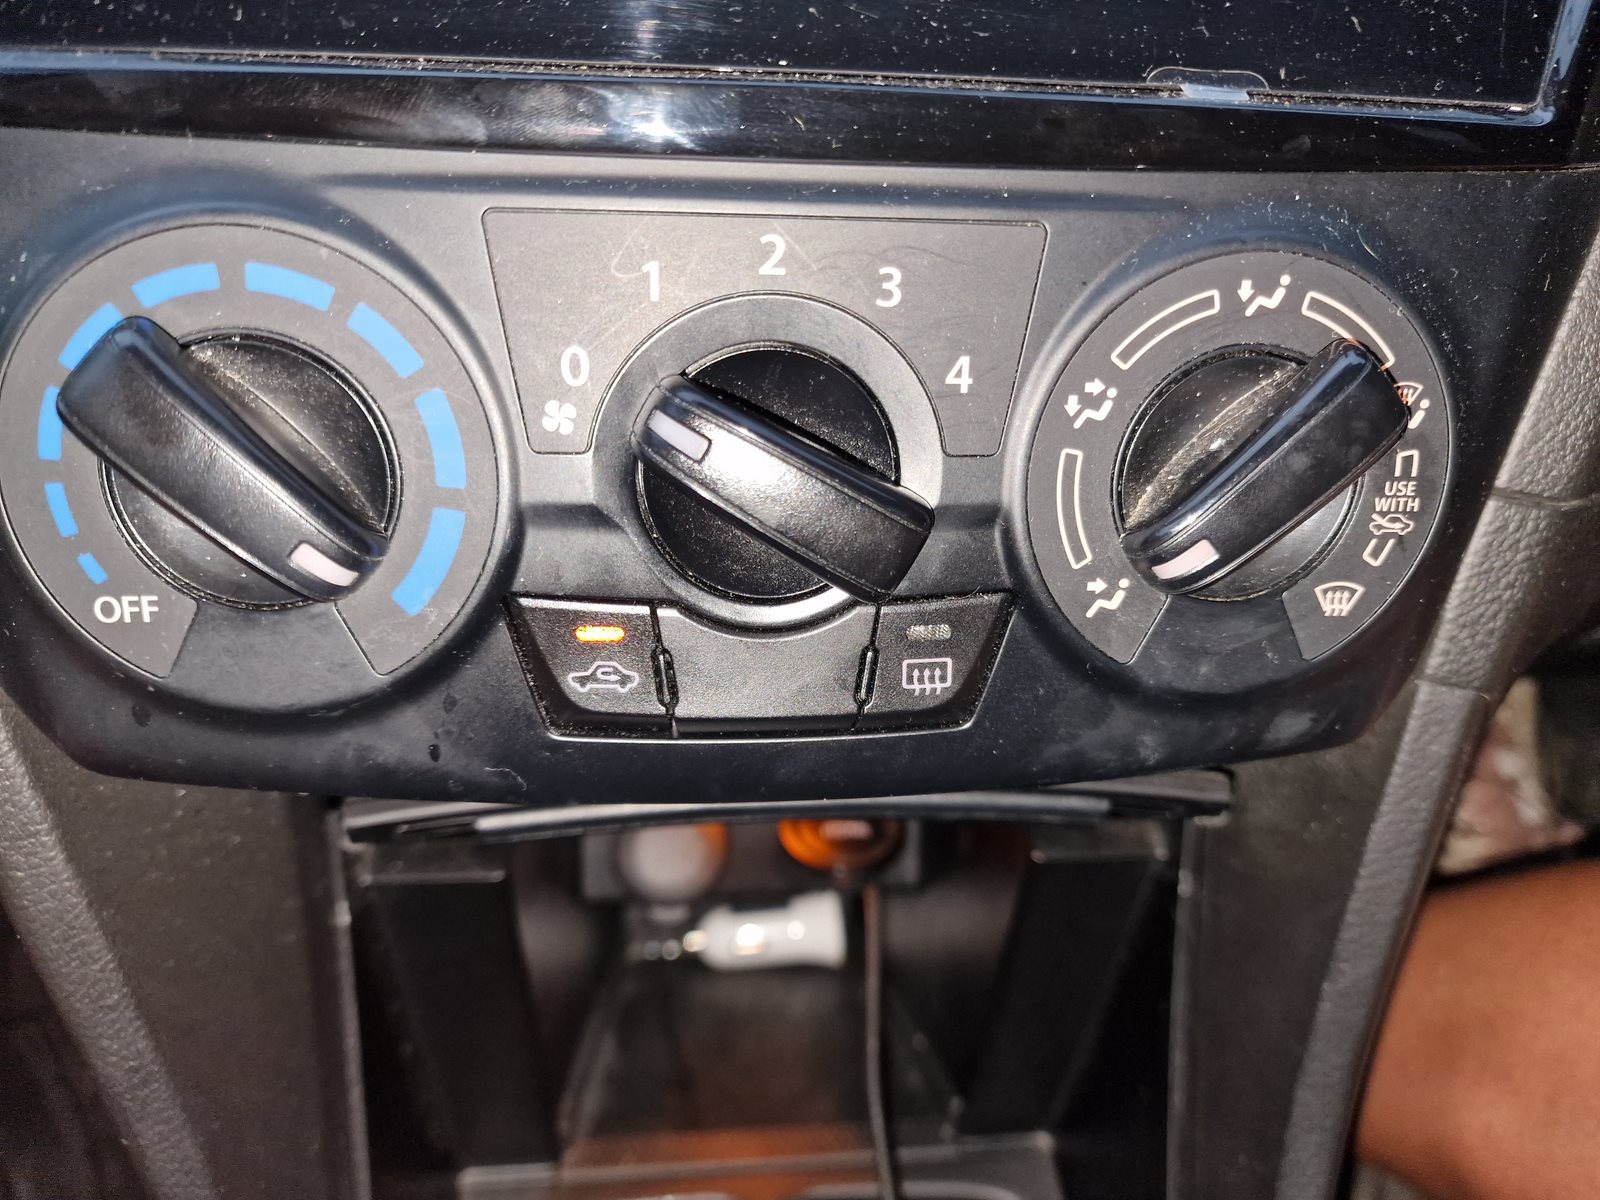 Heater Control in Car with No Heat